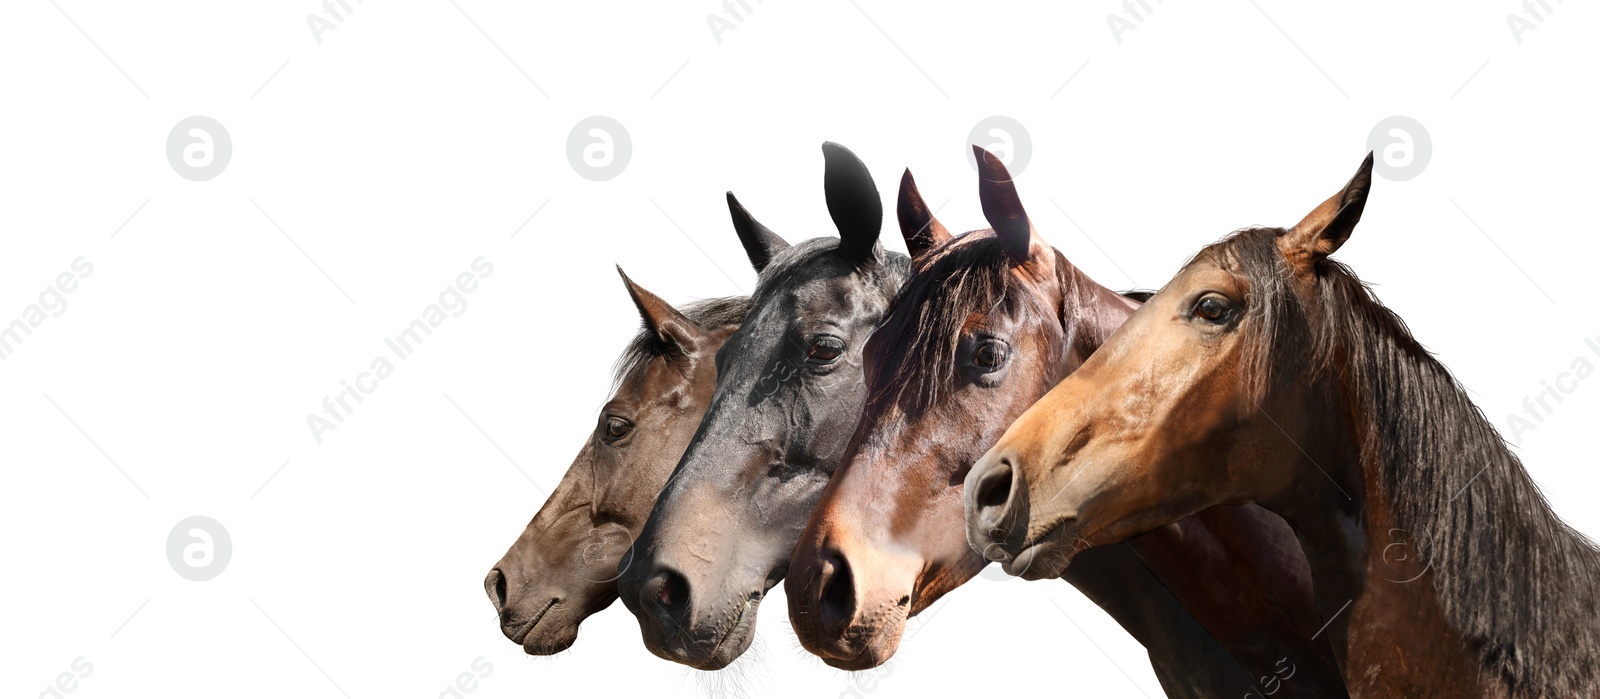 Image of Beautiful pet horses on white background, closeup view. Banner design